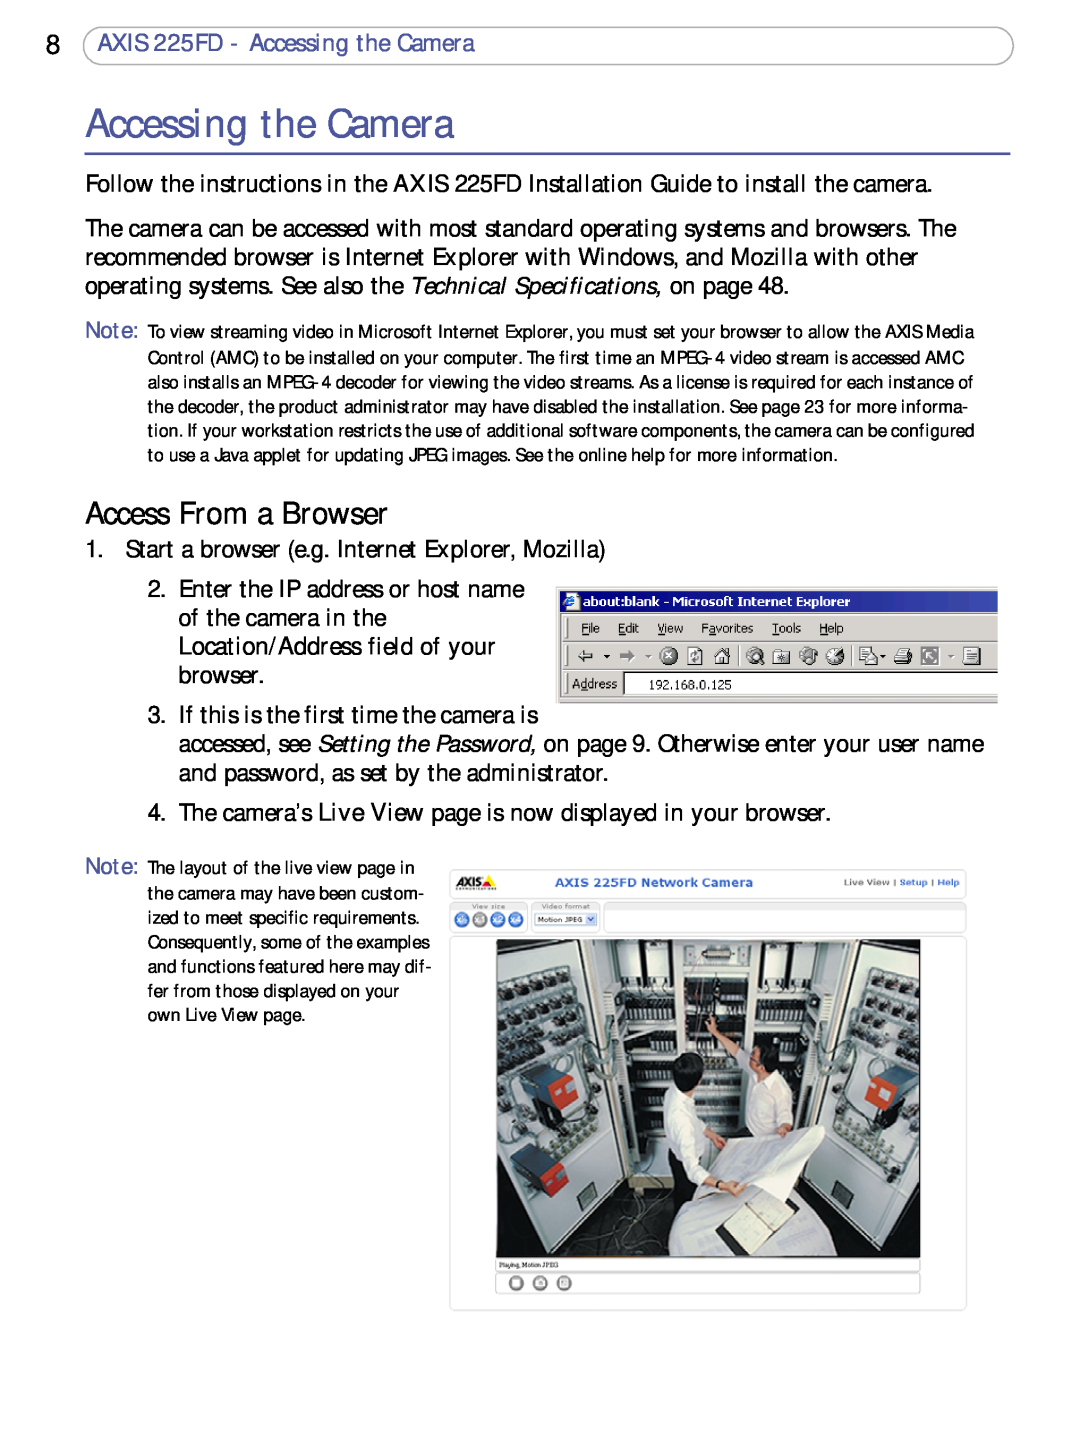 Axis Communications user manual Access From a Browser, AXIS 225FD - Accessing the Camera 